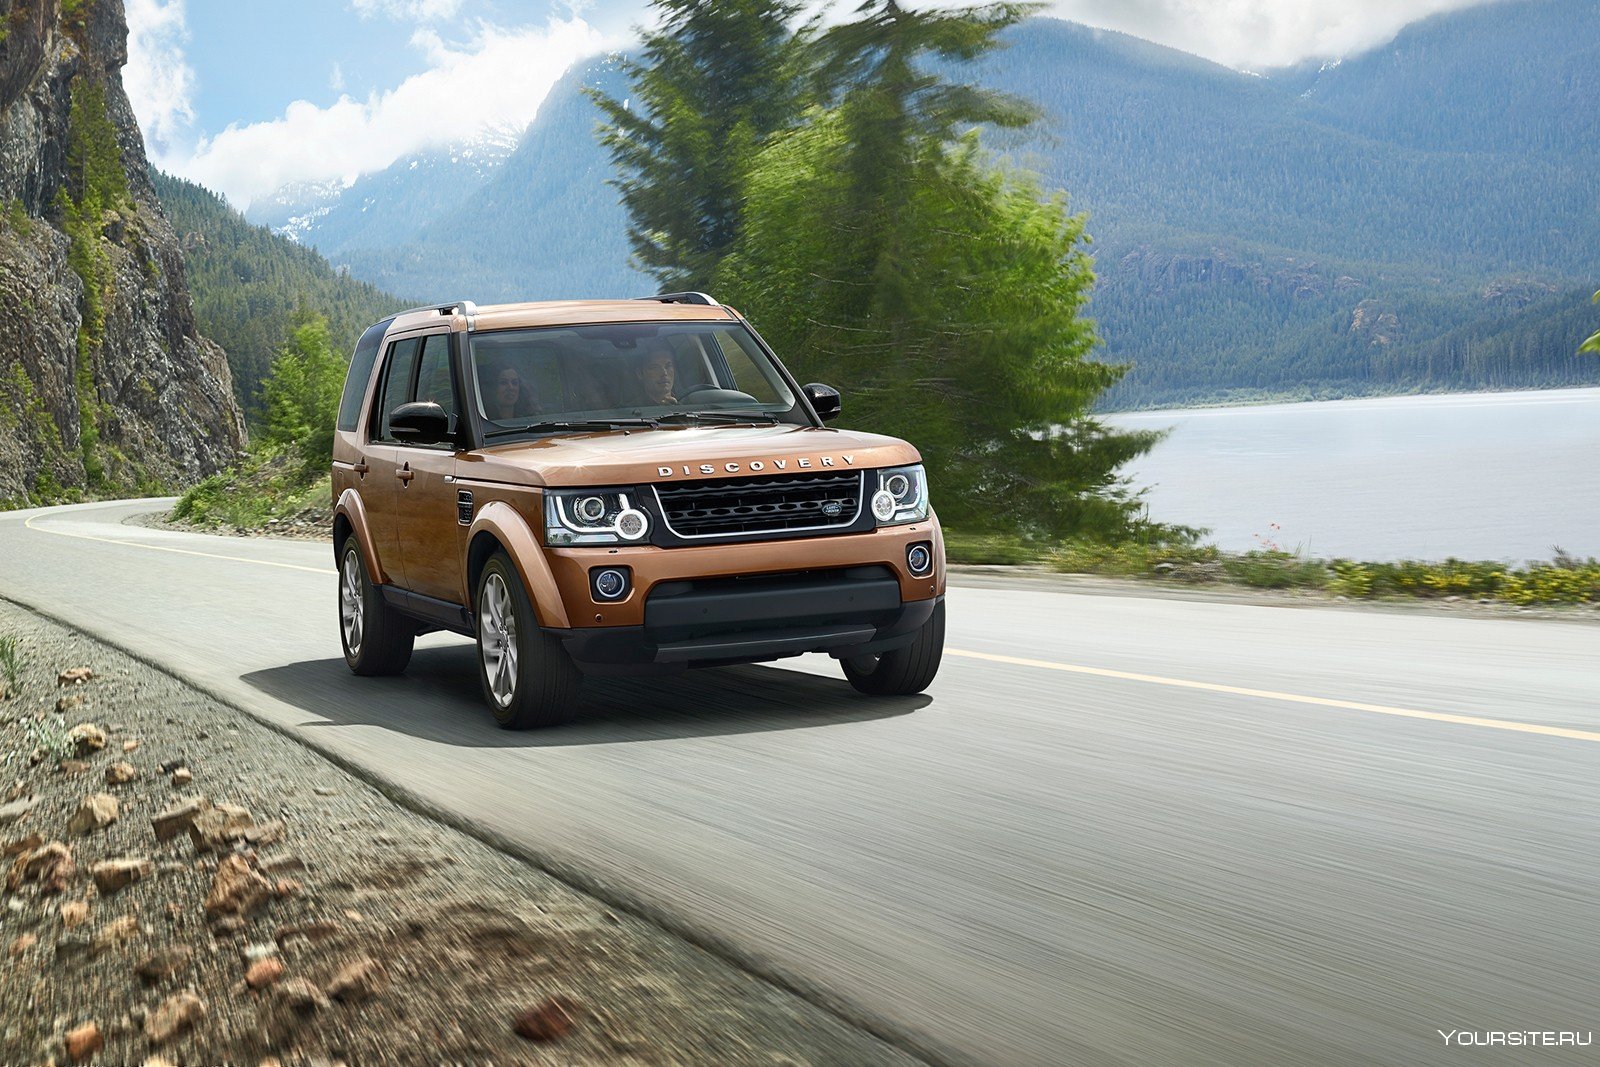 Дискавери 16. Land Rover Discovery 4. Ленд Ровер Дискавери 4 2015. Ленд Ровер Дискавери 2015. Ленд Ровер Дискавери 5.